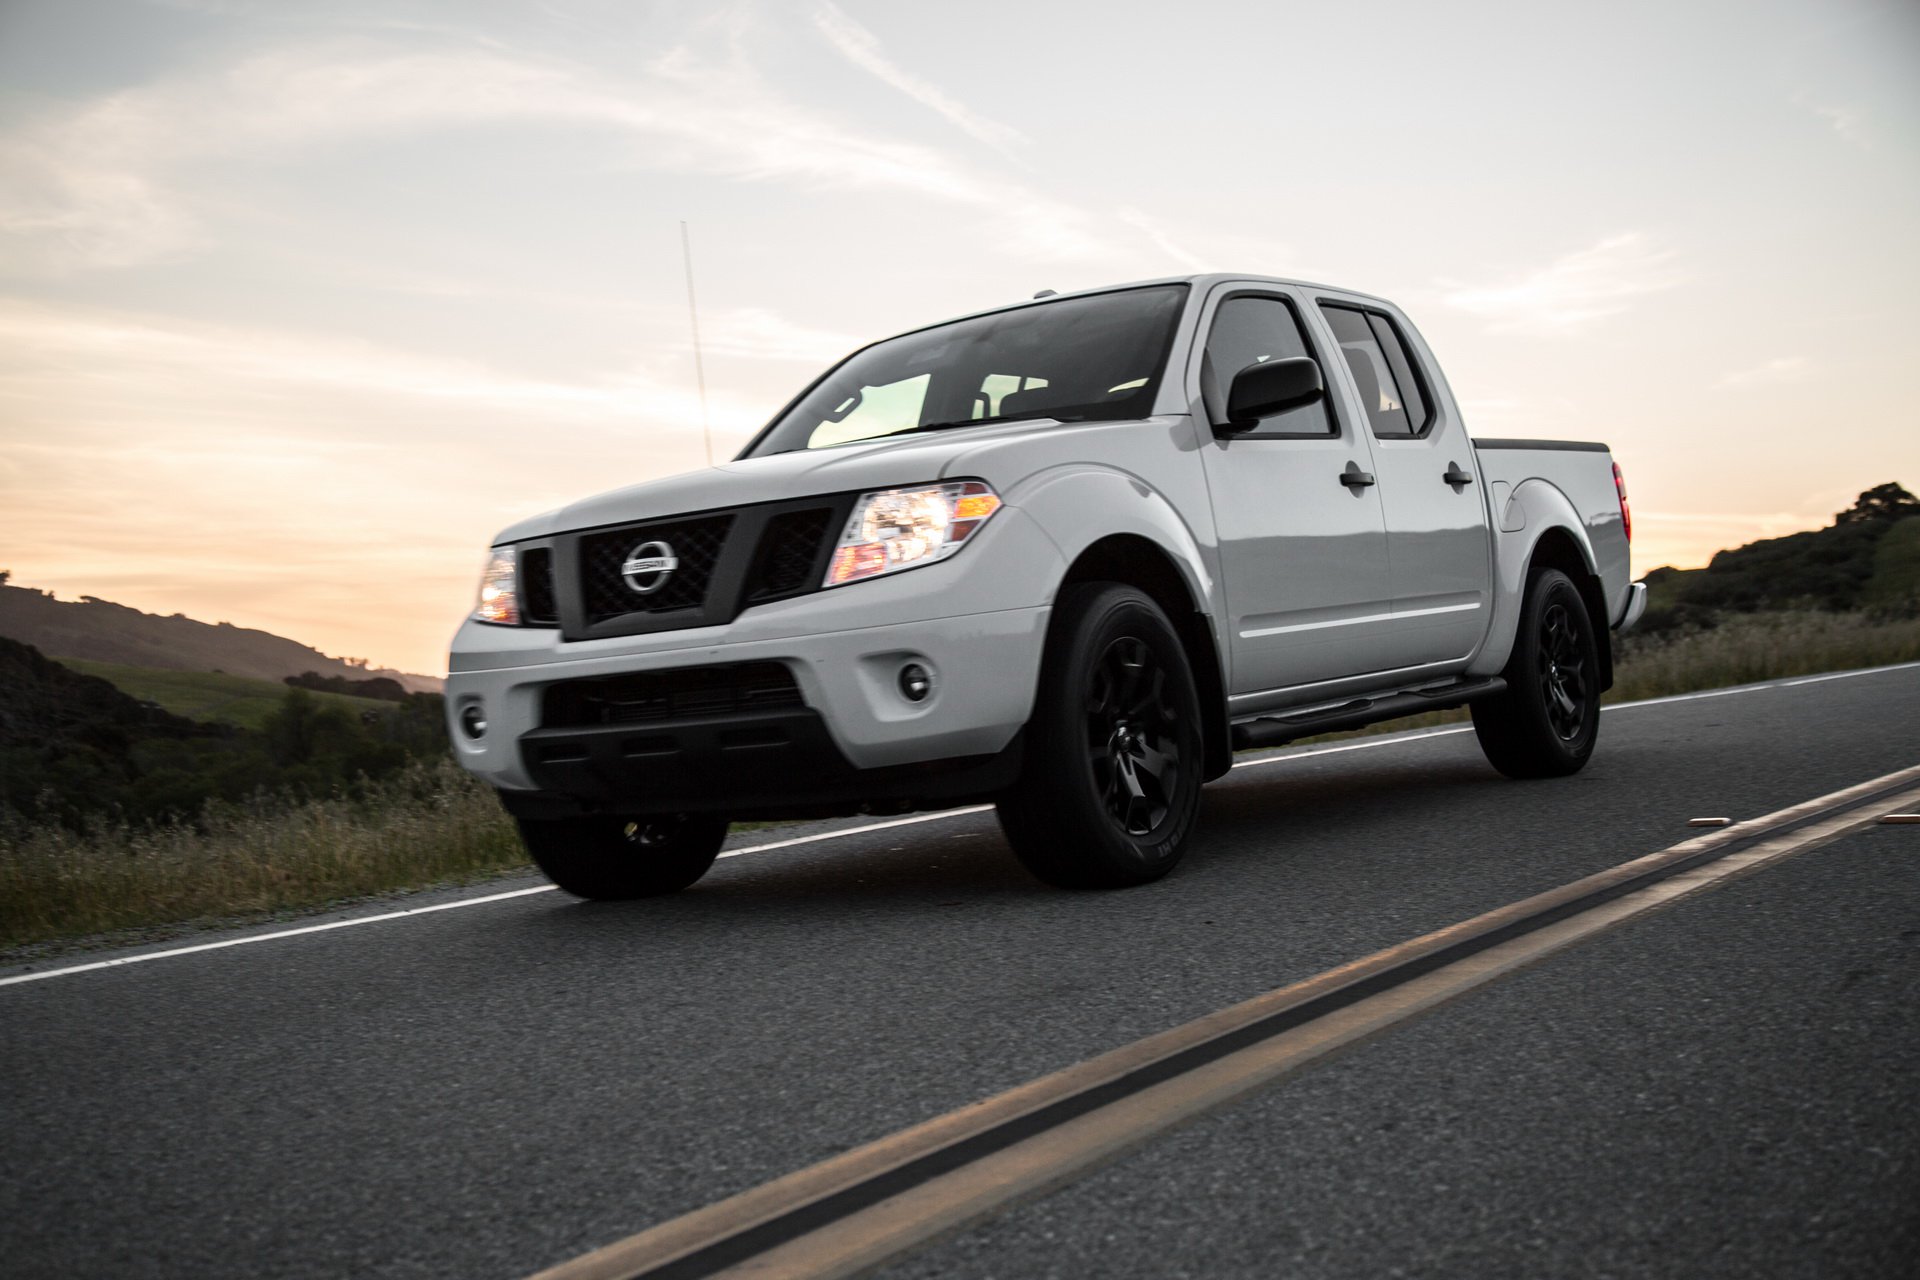 2019 Nissan Frontier Soldiers On, Priced at $18,990 - autoevolution